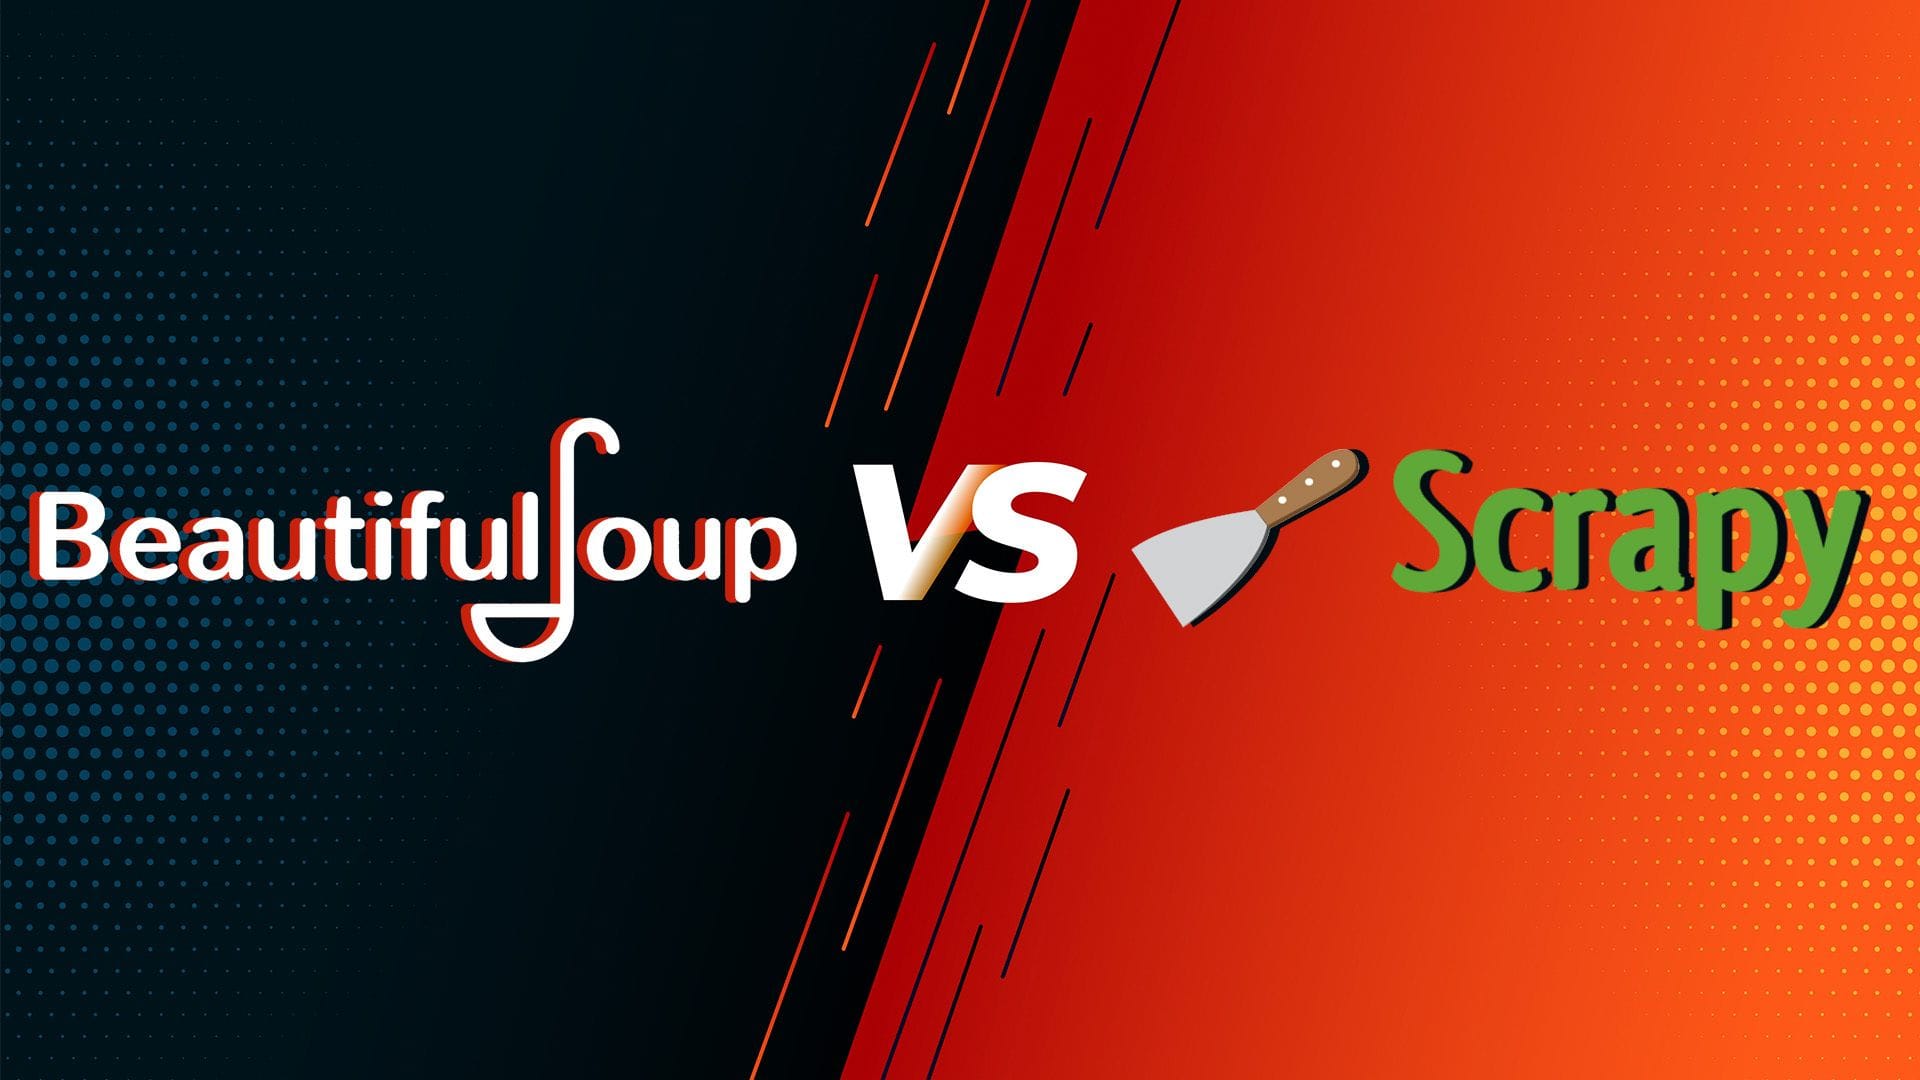 Beautiful Soup vs. Scrapy: which one to choose for web scraping?